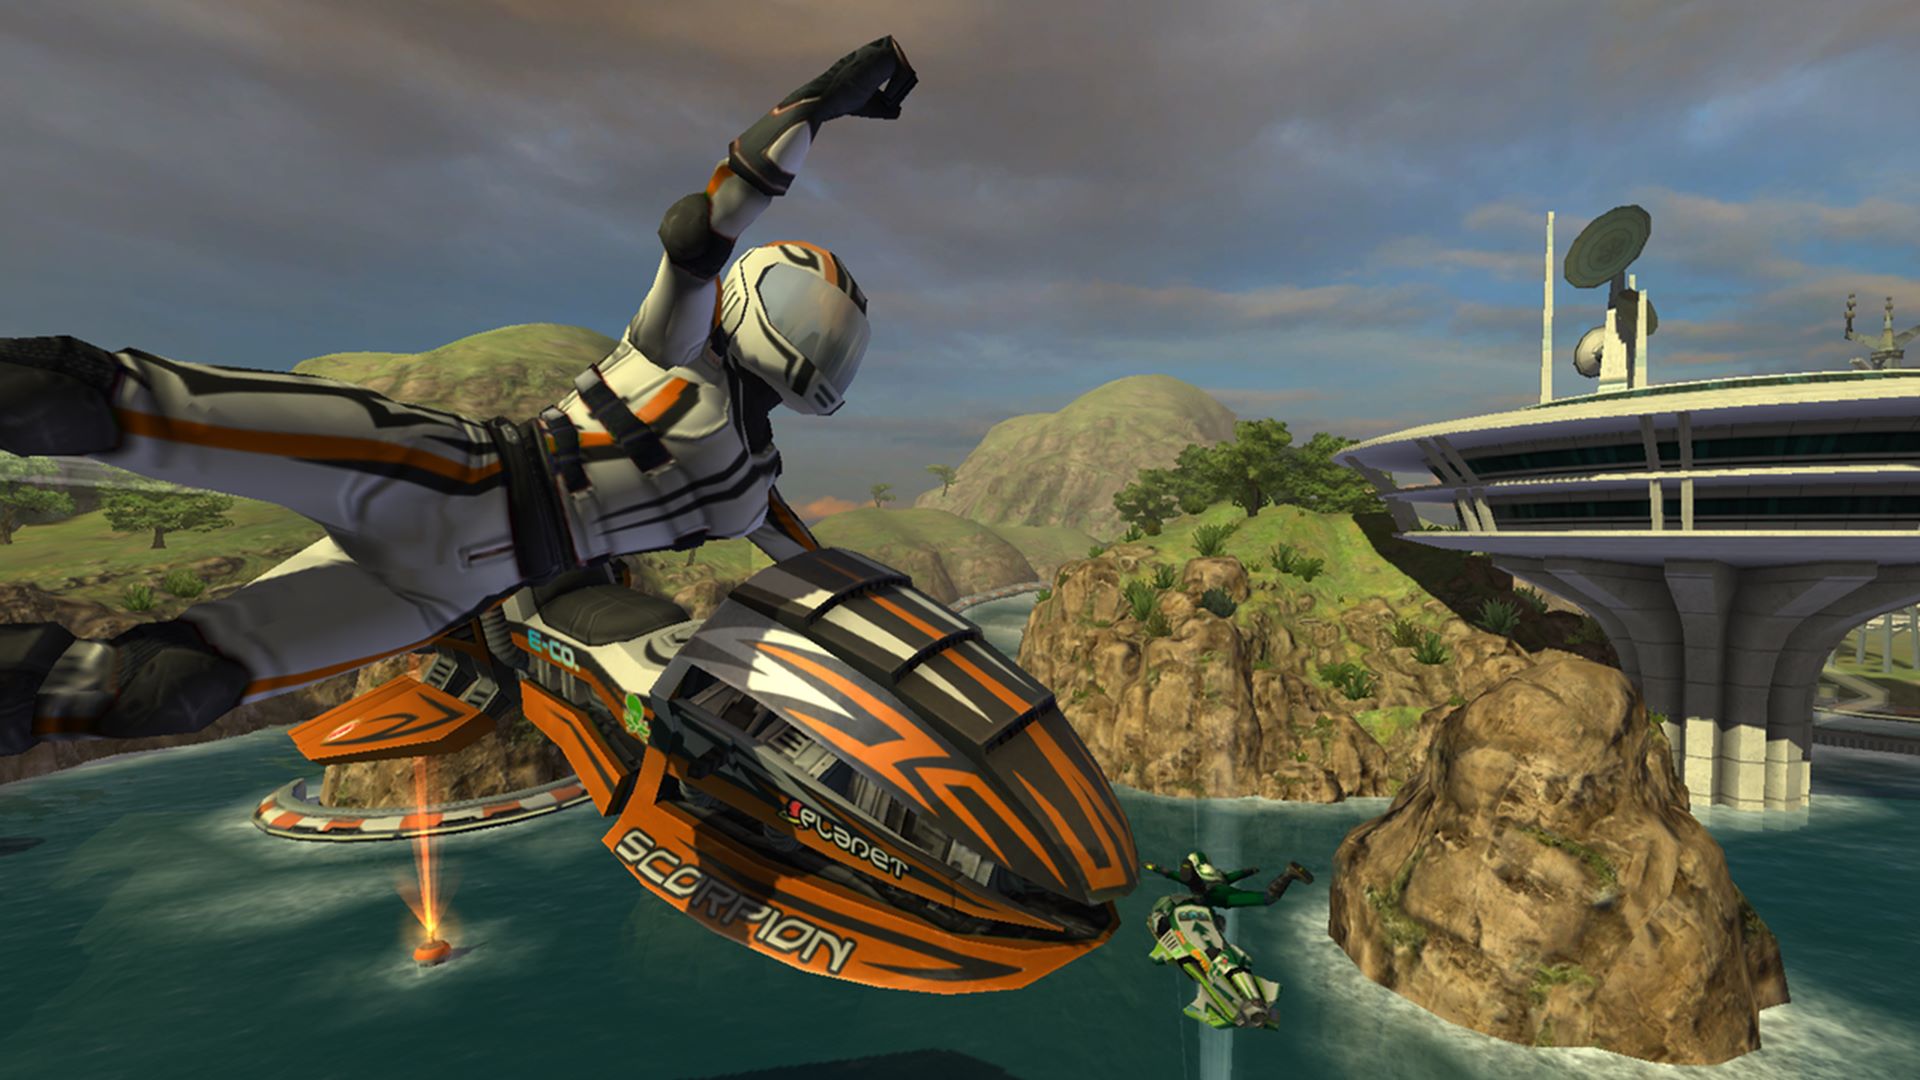 riptide gp 2 redeem code for android